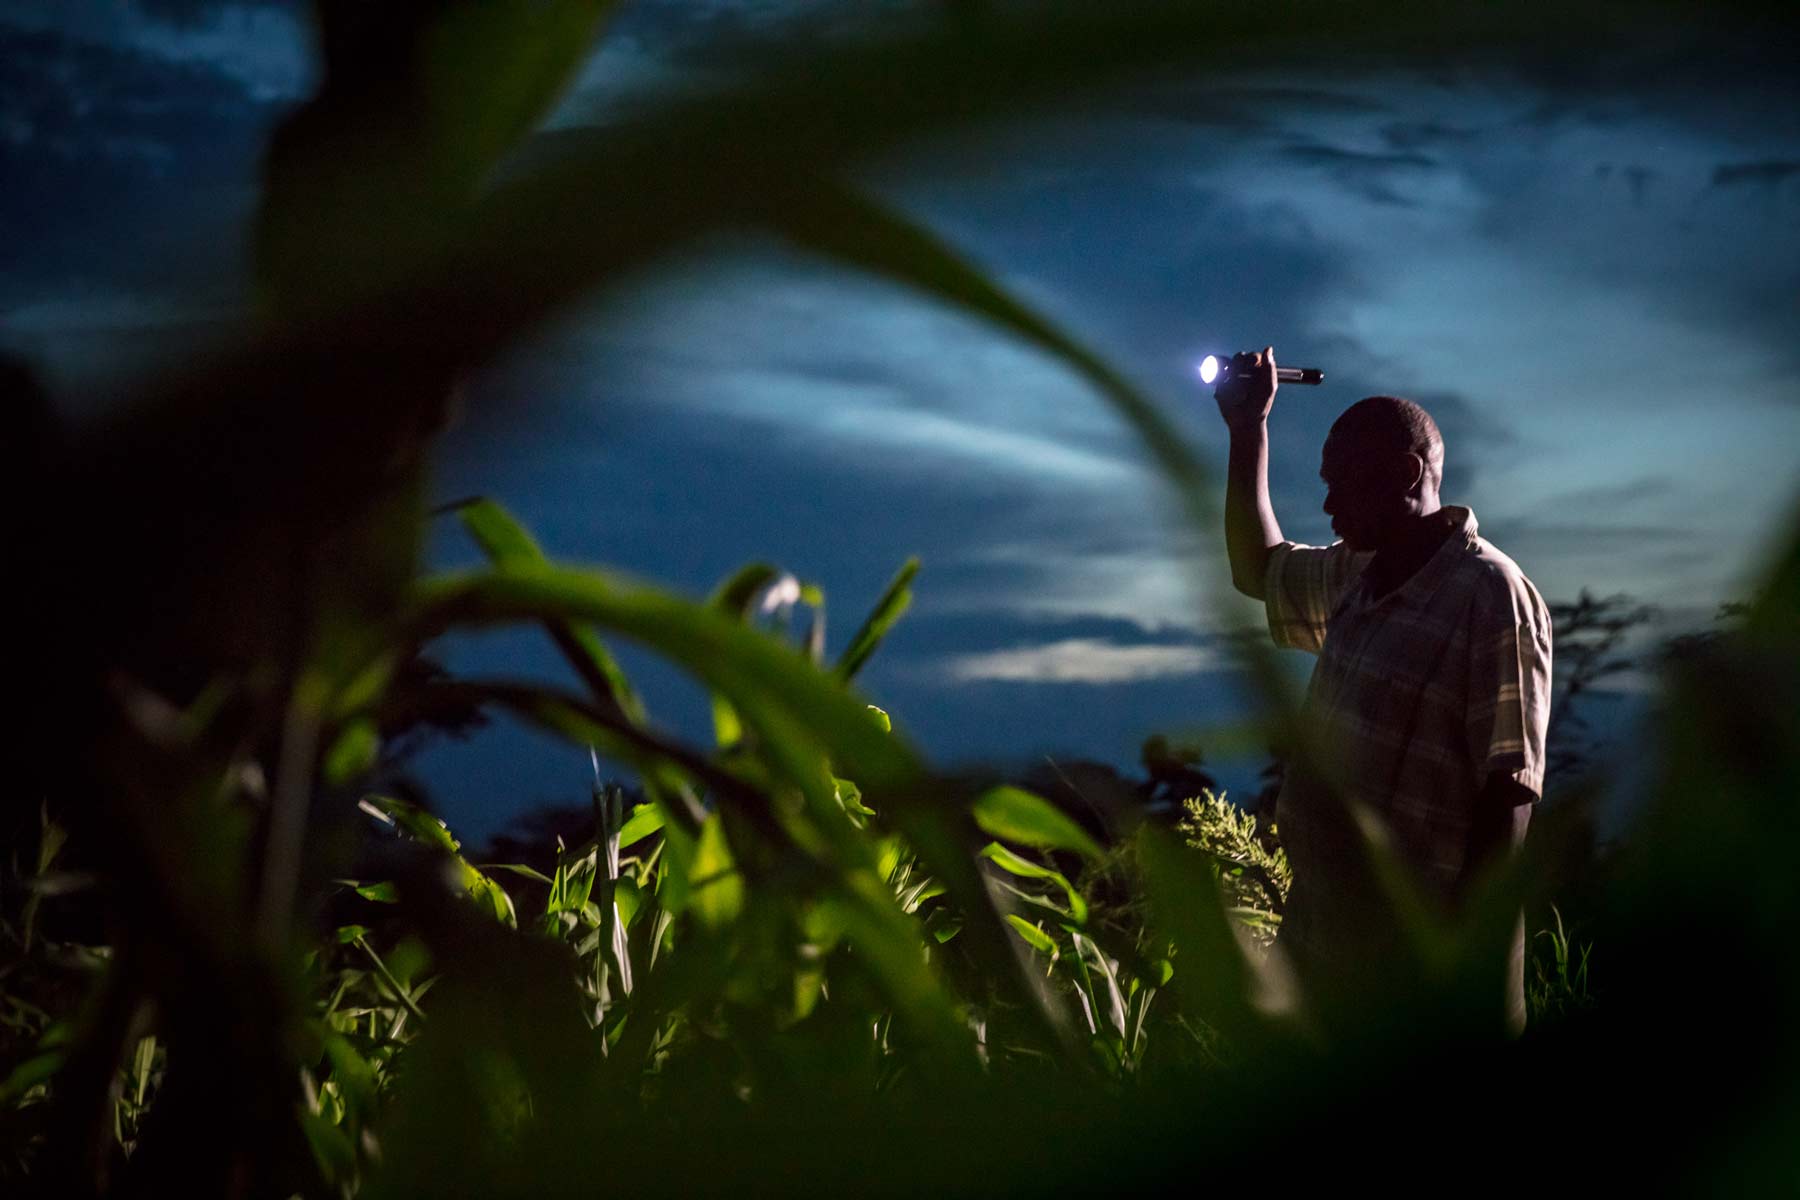 A farmer from a local village in the Grumeti Concession checks his crops at night. Crop raiding by elephants is a common occurrence in the Reserve and can severely impact local farmers who often lose a full year’s crops in one crop-raiding incident, which is heartbreaking for the famer and his family who are dependent on their crops for their survival.